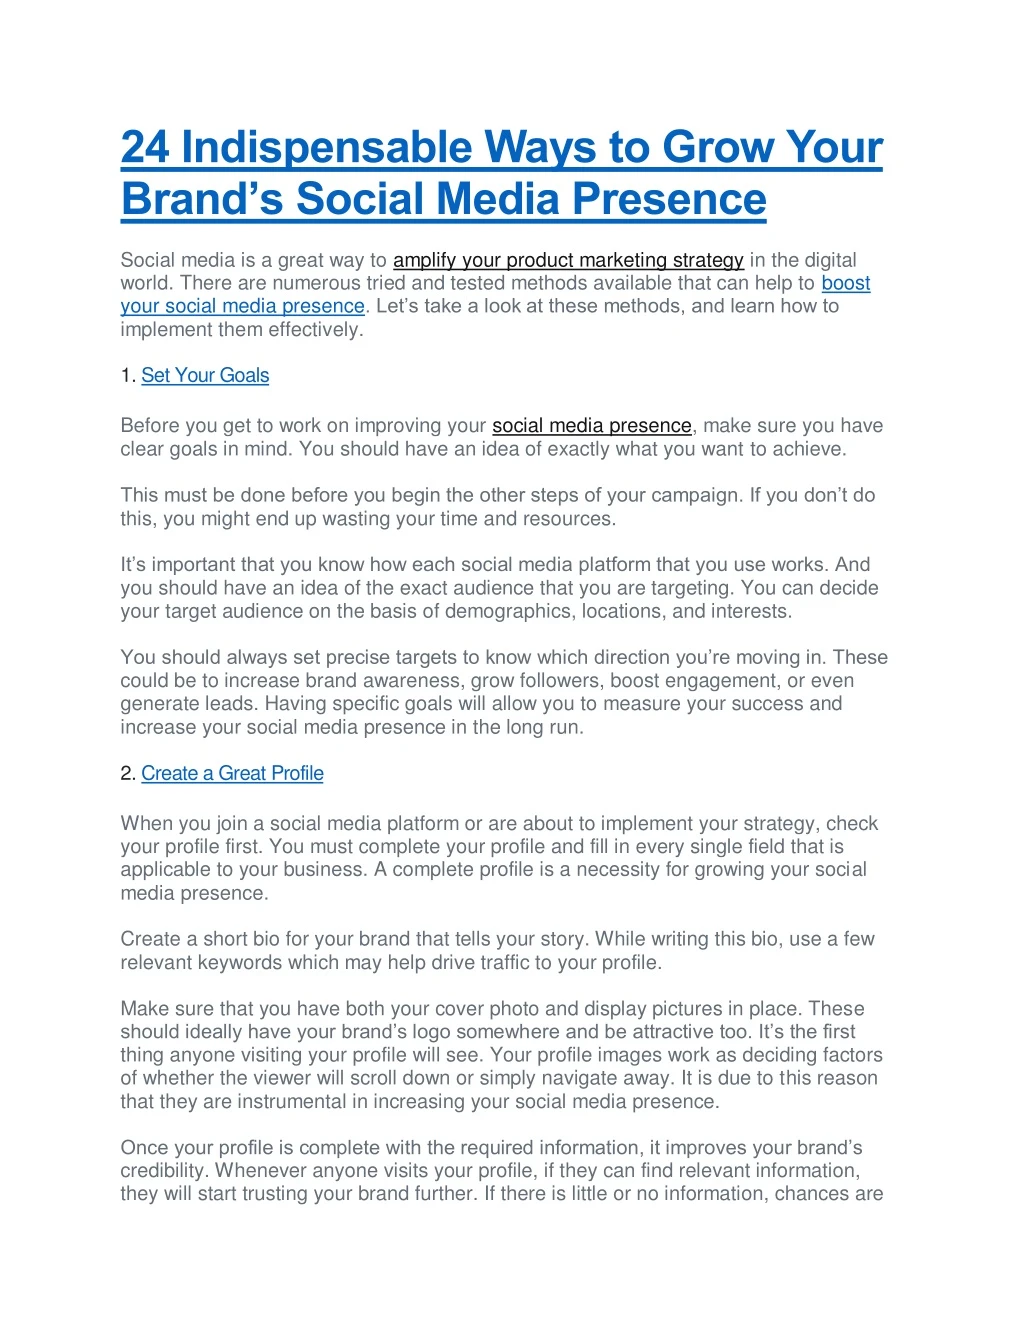 24 indispensable ways to grow your brand s social